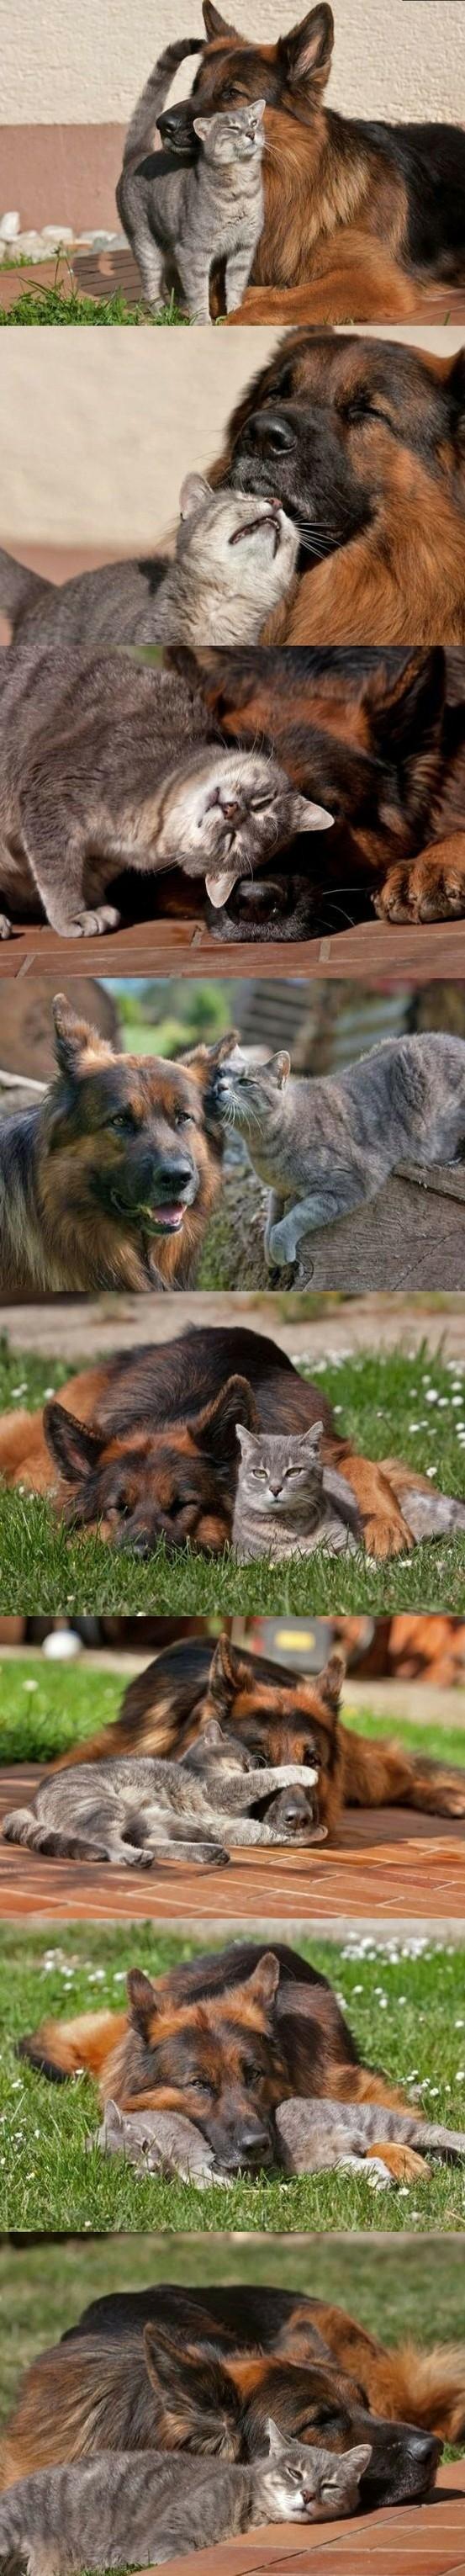 Cuddly Dog and Cat Friendship